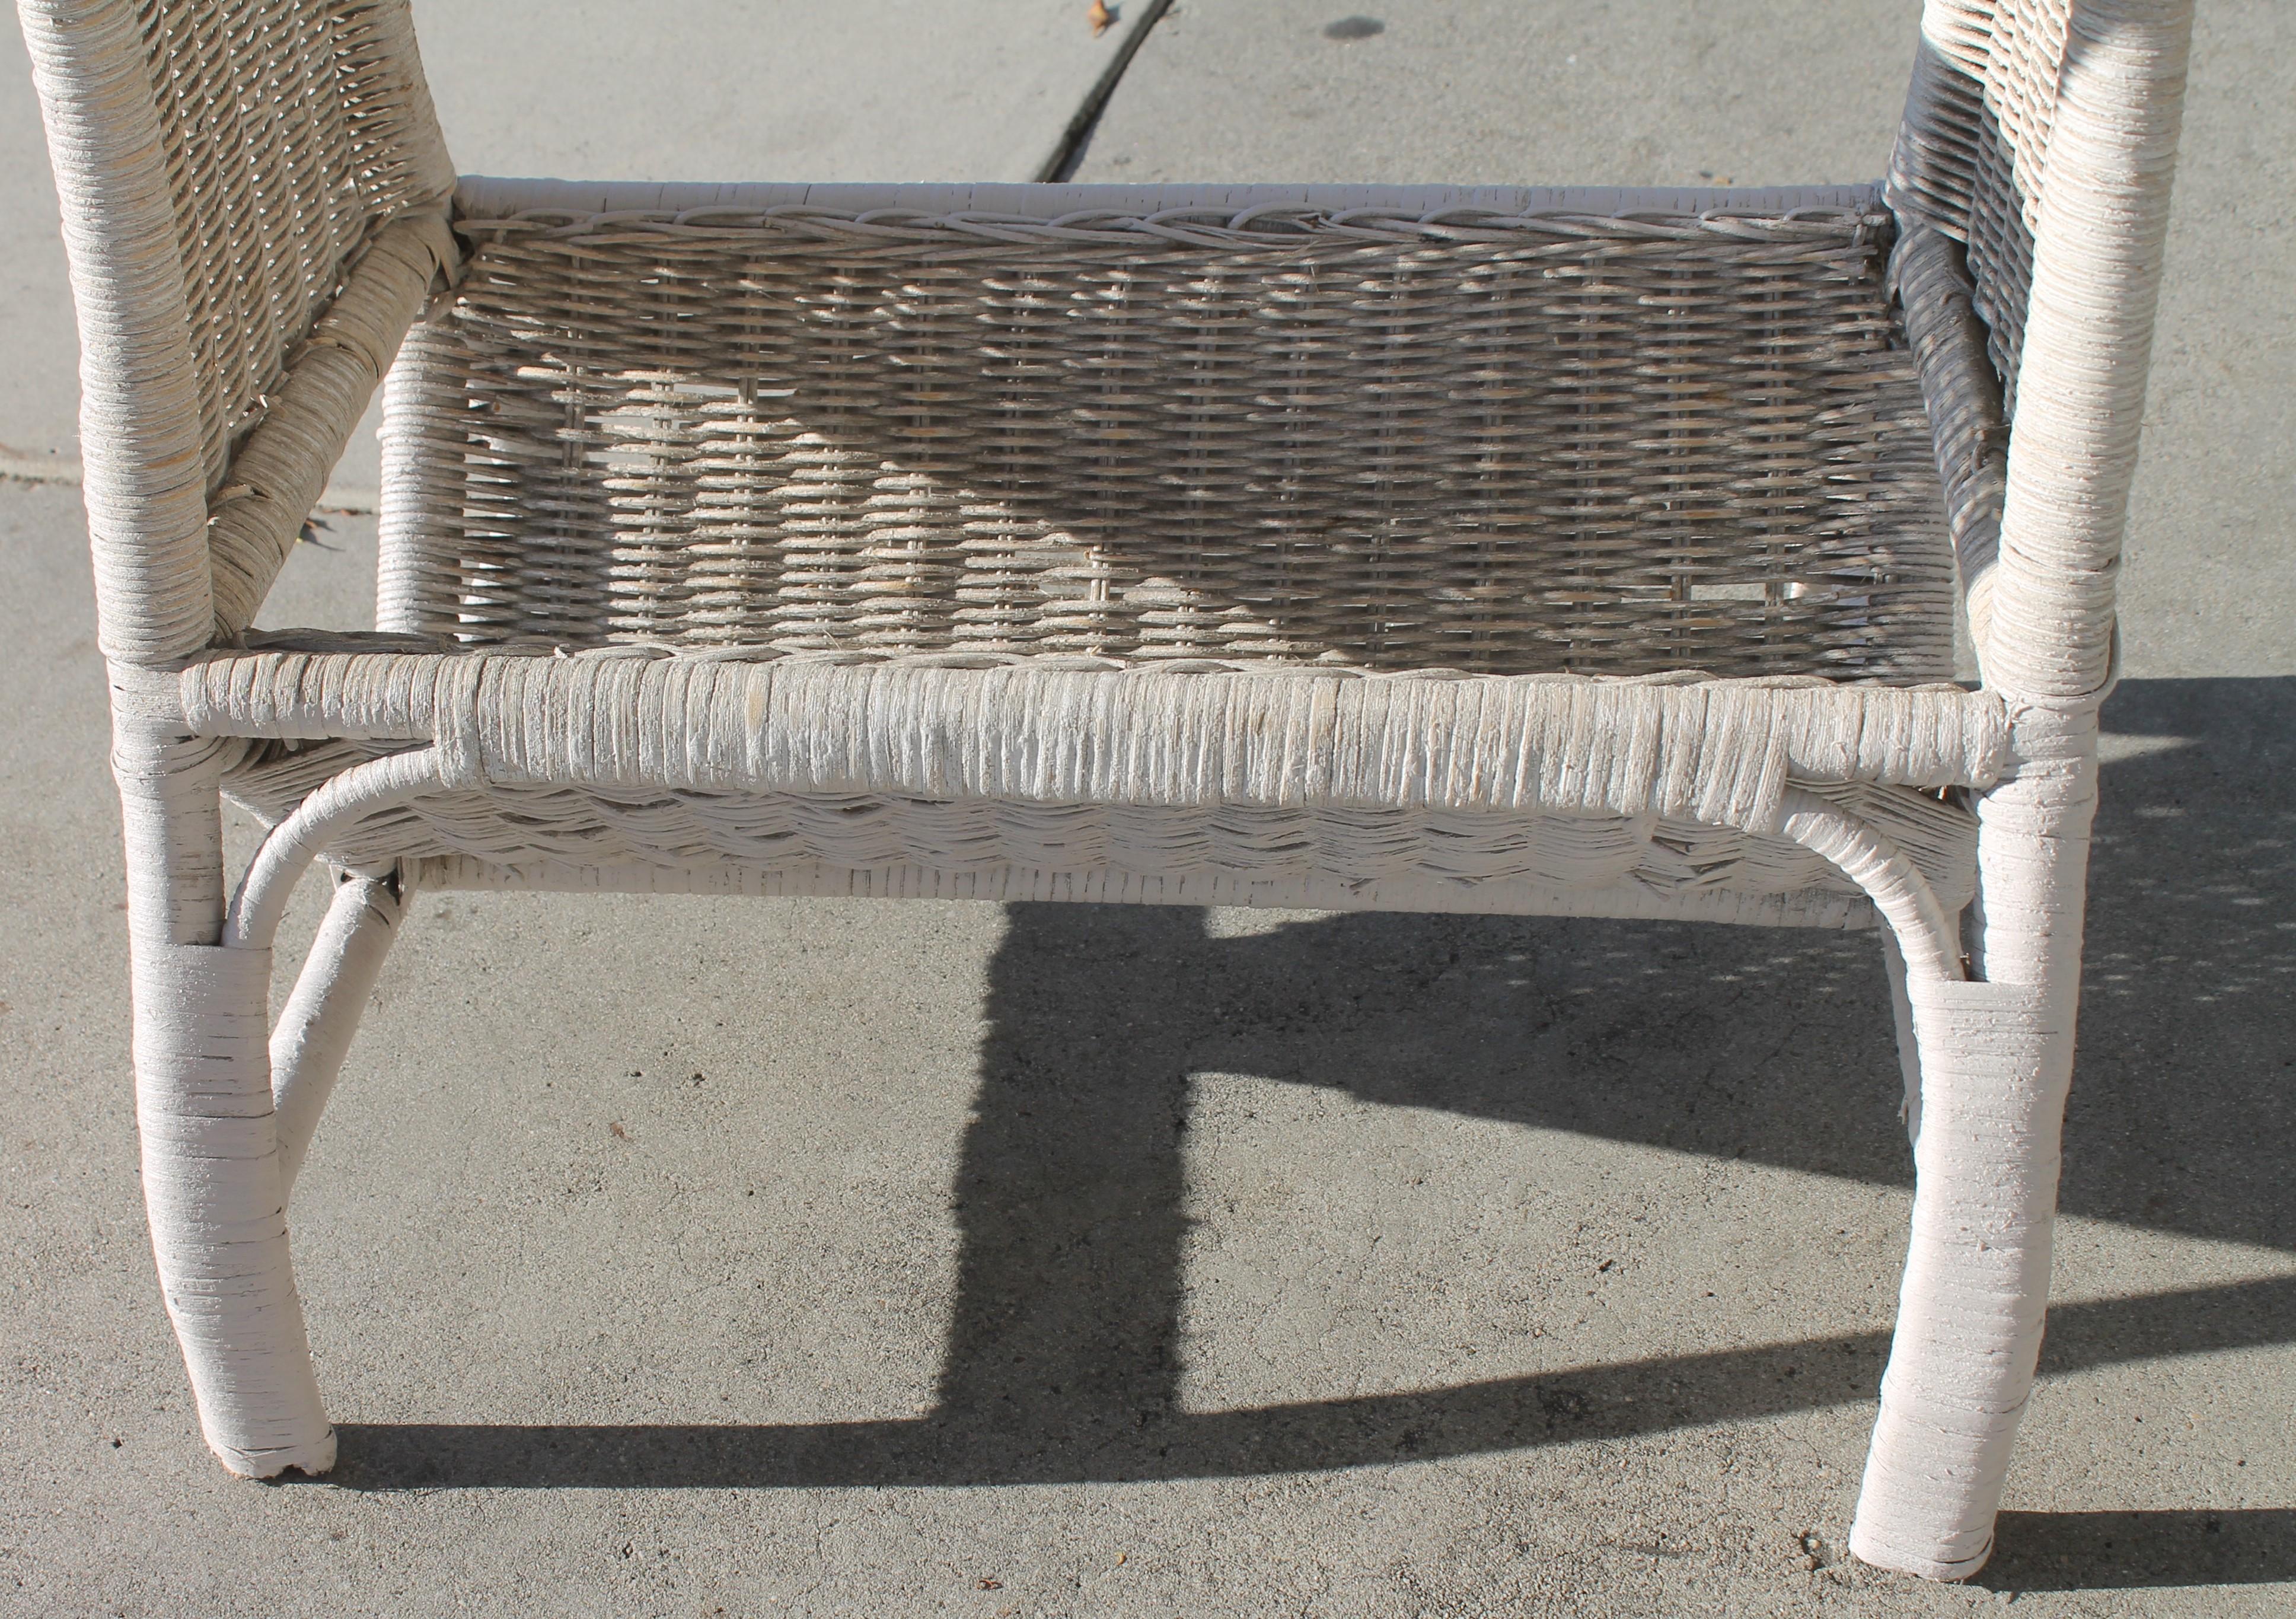 Hand-Painted Wicker Side Table in Original White Painted Surface